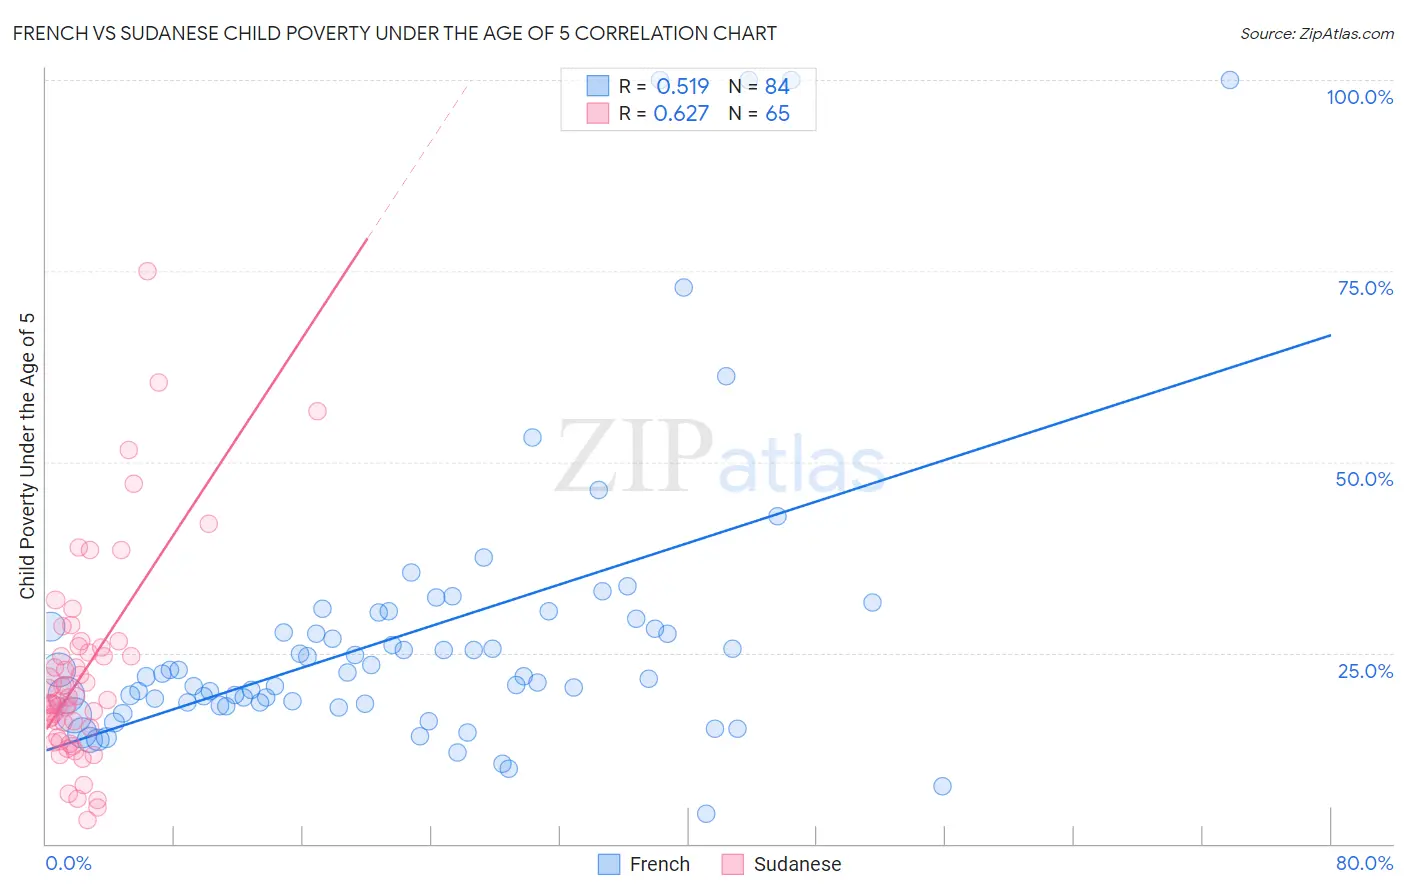 French vs Sudanese Child Poverty Under the Age of 5